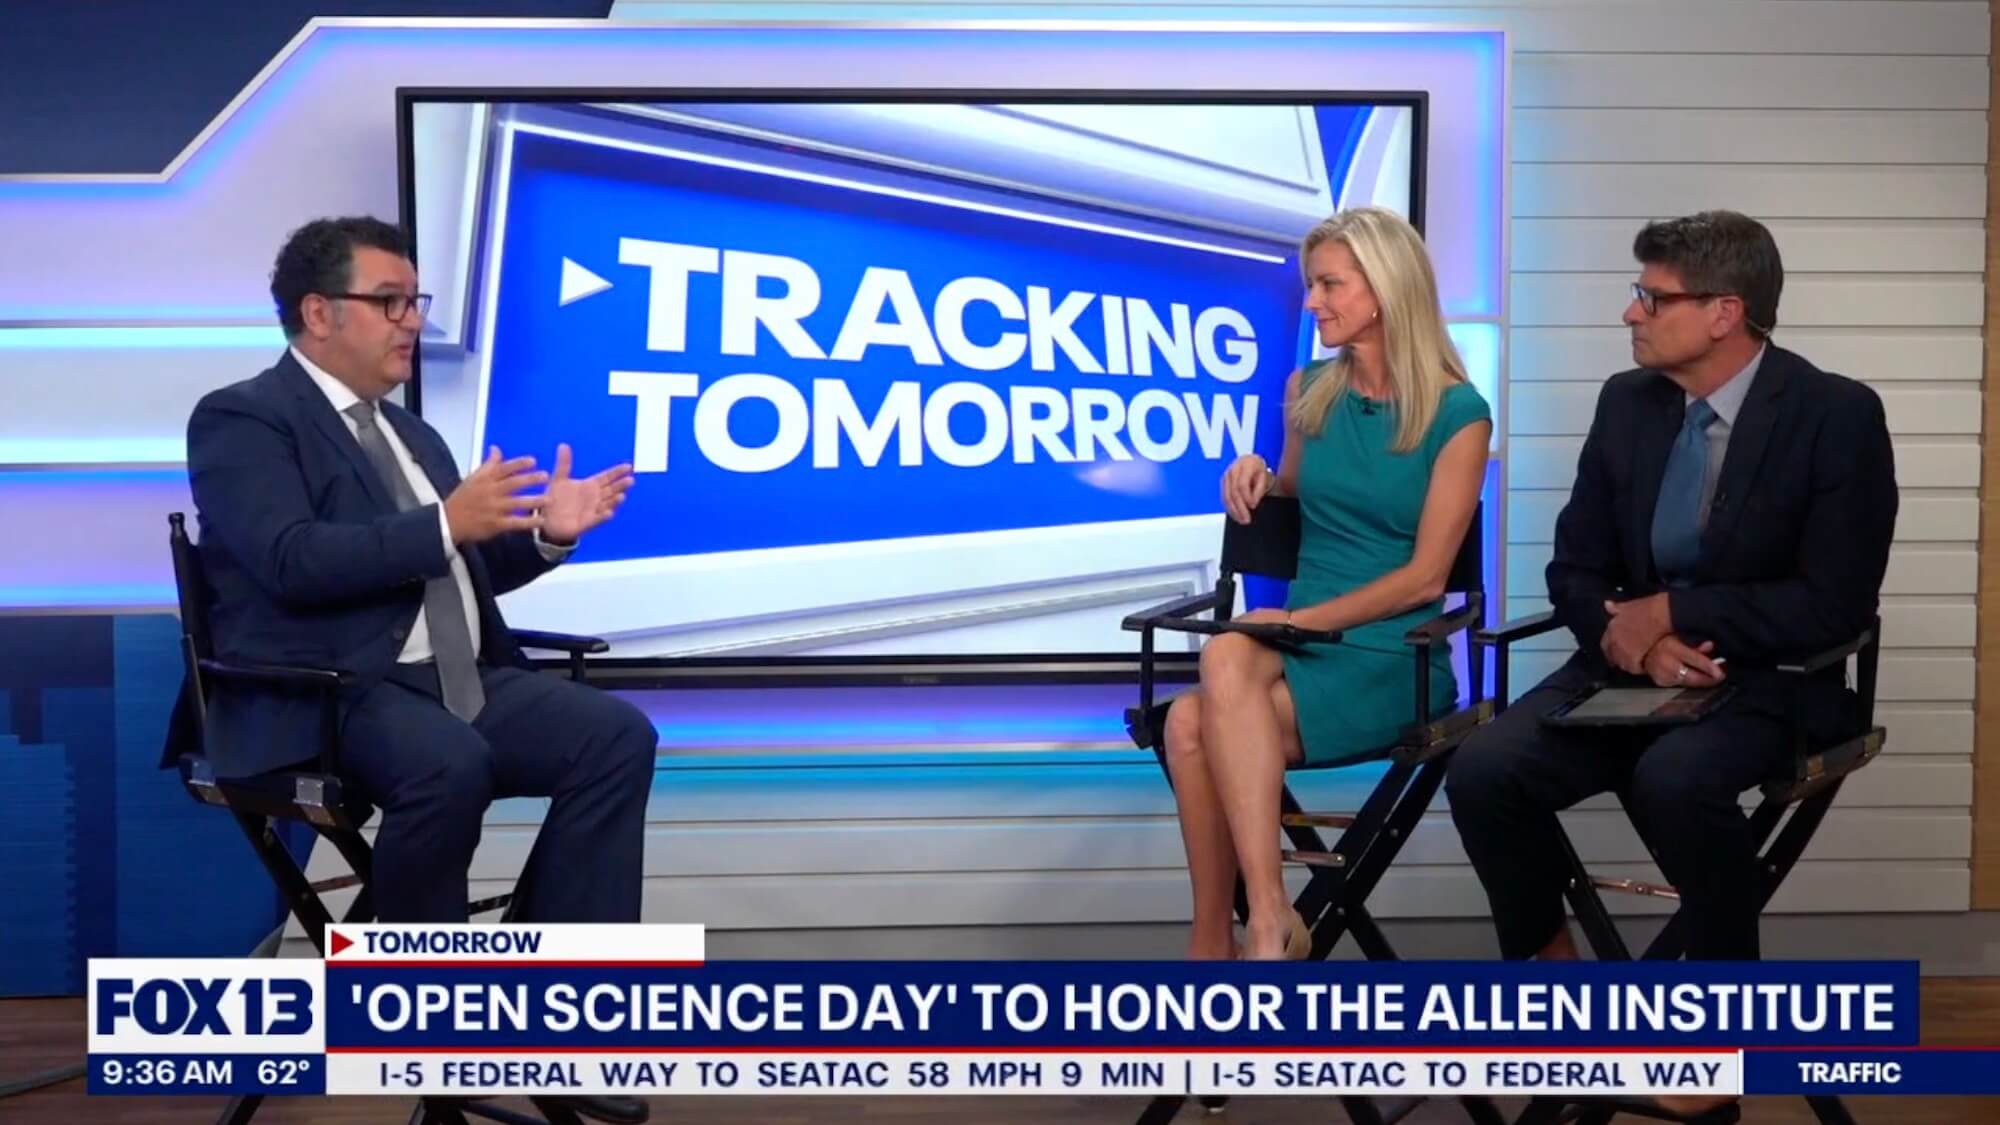 Image of Allen Institute CEO Rui Costa interviewing on television to discuss Open Science Day.